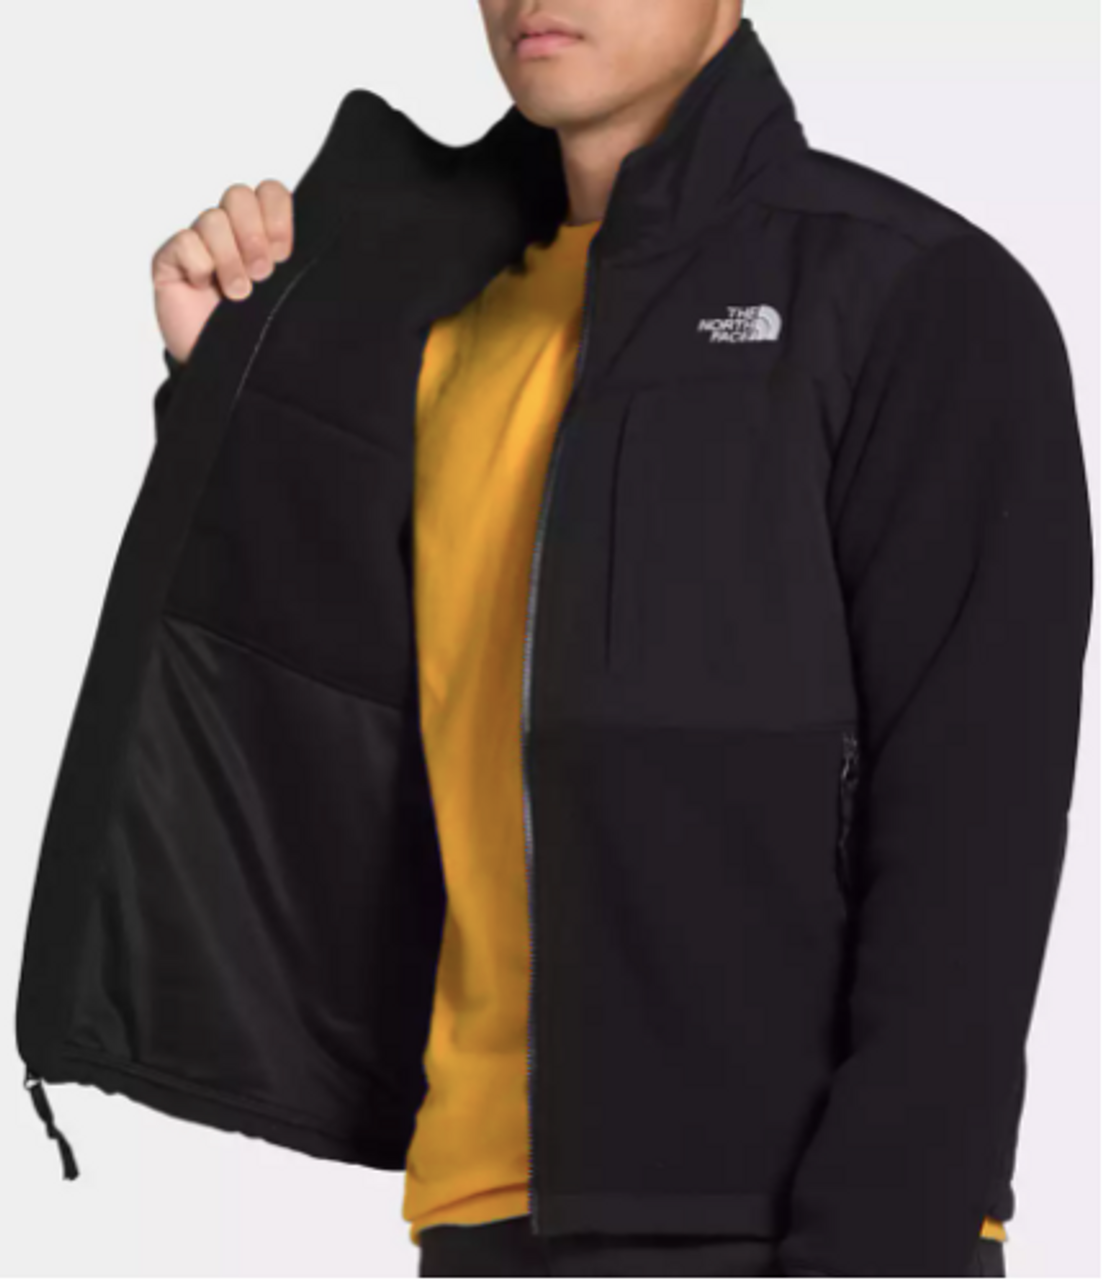 THE NORTH FACE DENALI 2 JACKETS - Steve's on the Square